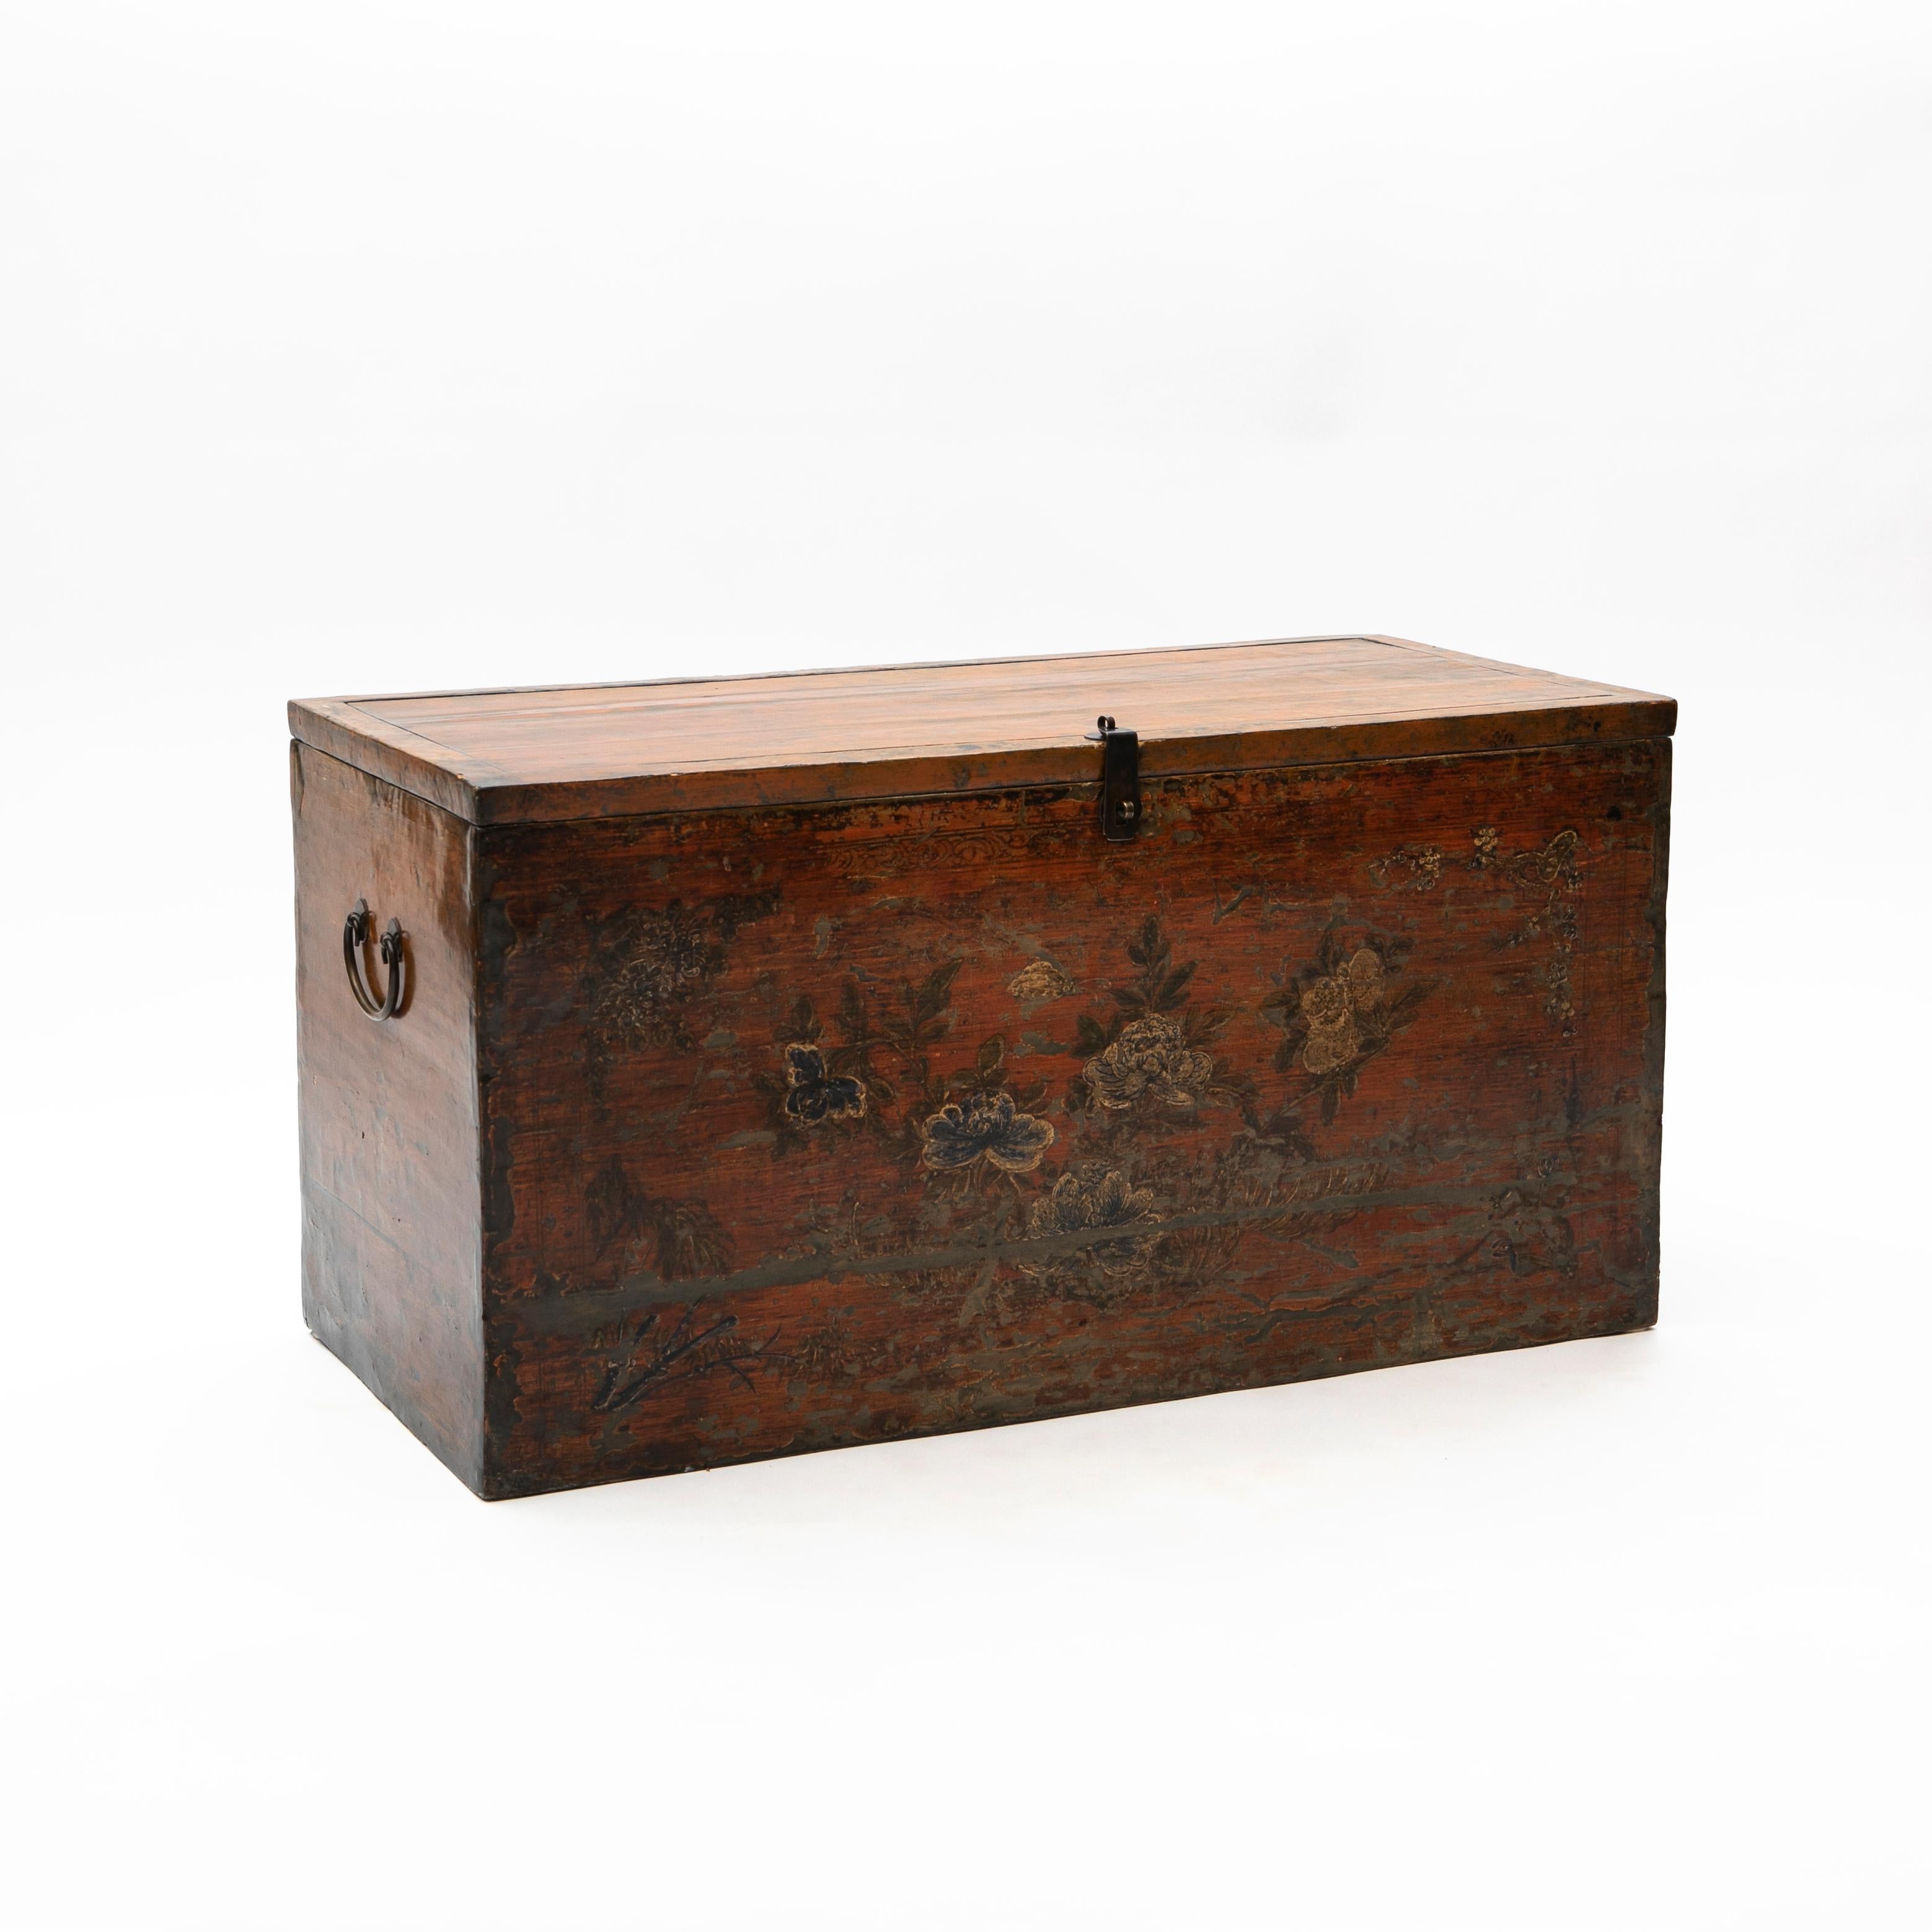 Lacquered storage trunk with original lacquer and decorations.
Made of lacquered linden wood with the front is subtly decorated with flower motifs in polychrome lacquer.
C-scroll handles on each side.

Naturally worn from age and use, with a